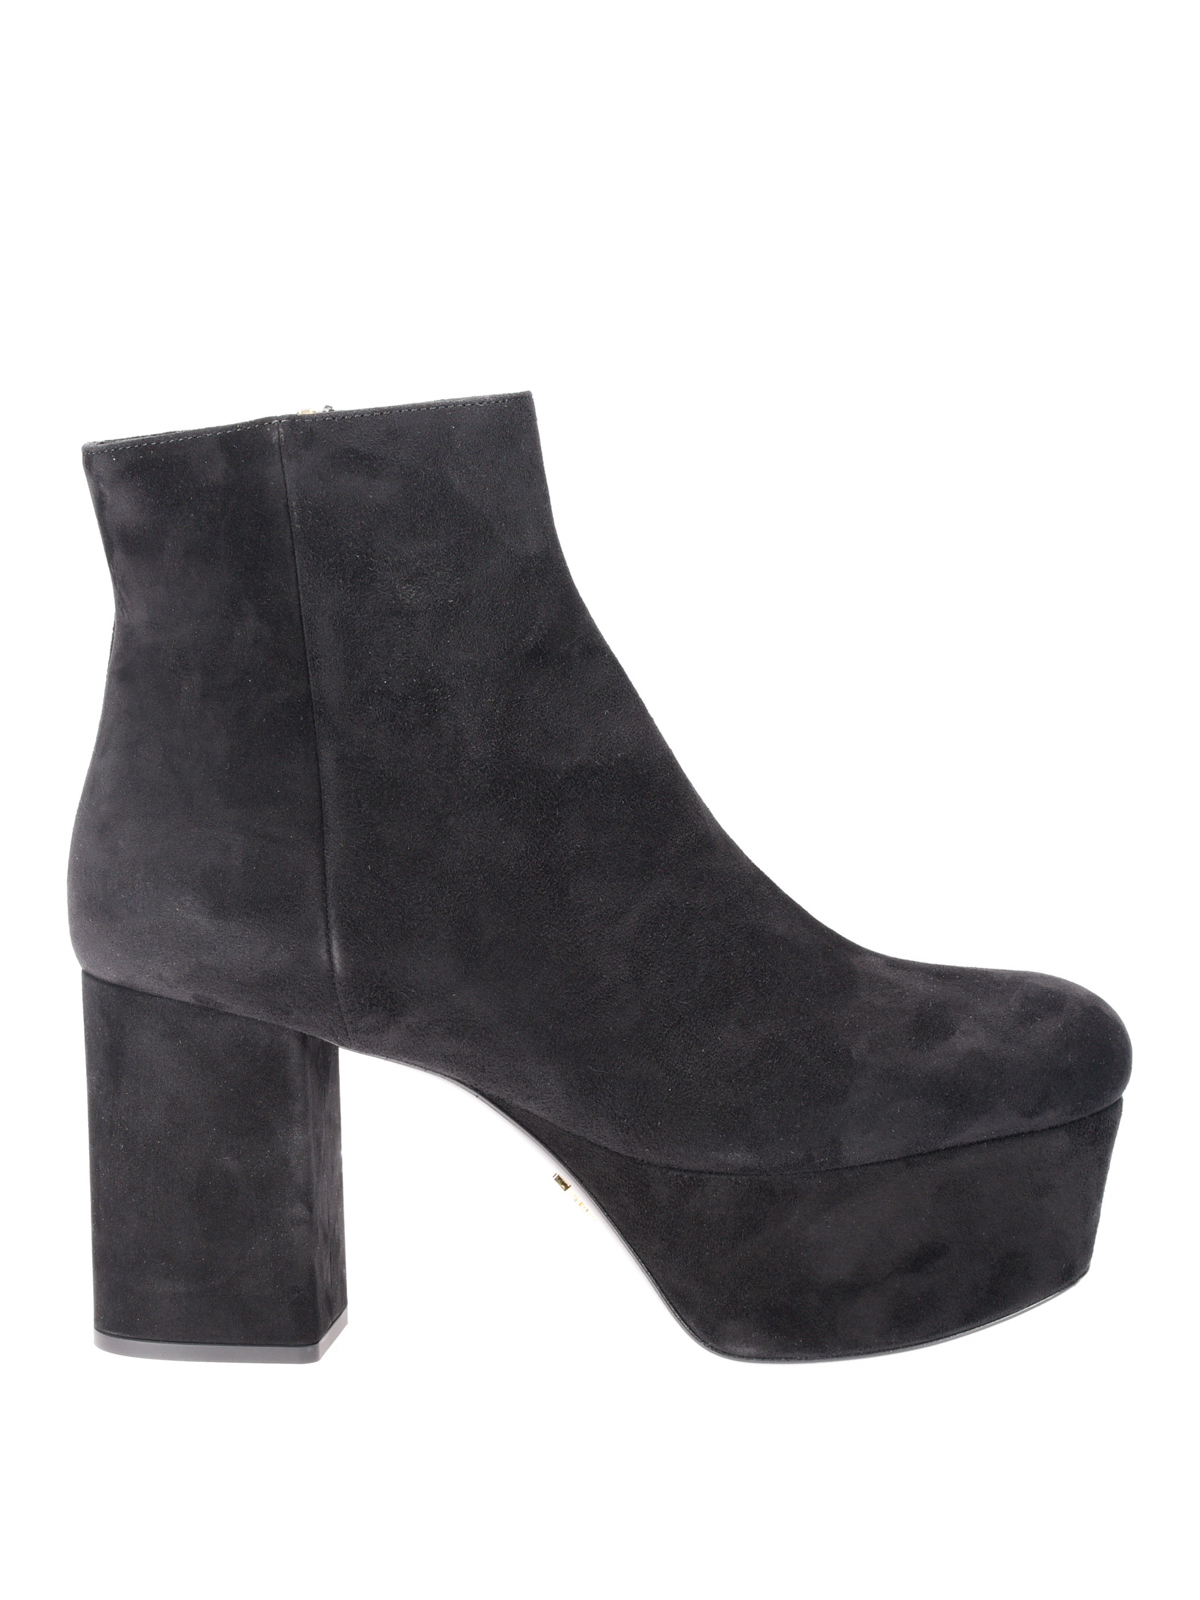 booties with thick heel